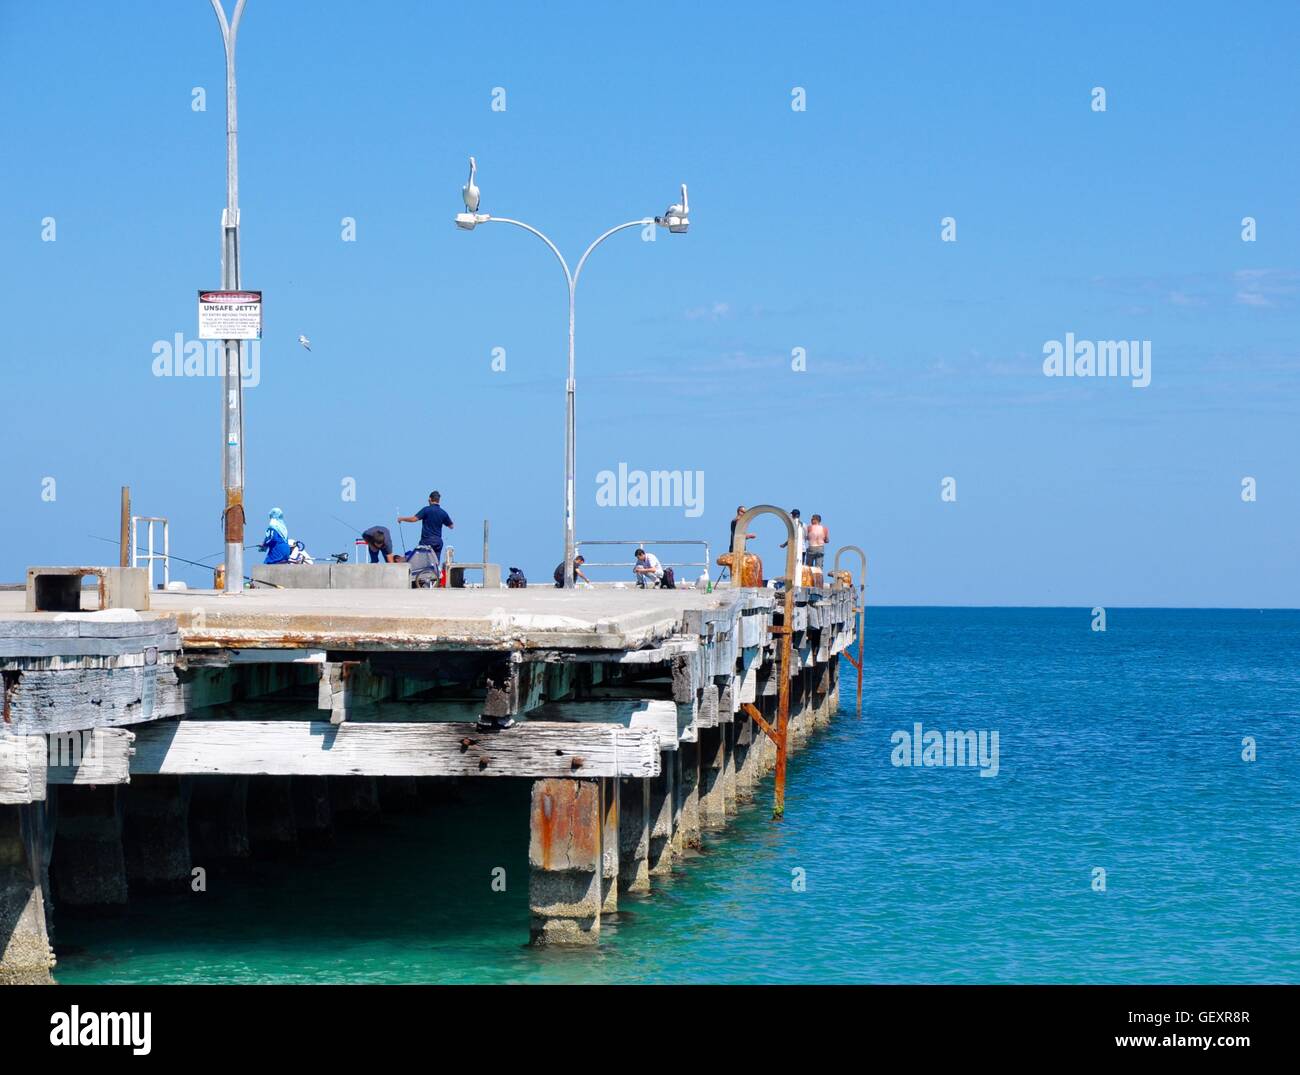 Coogee,WA,Australia-November 13,2015:People fishing on the Coogee Beach jetty with pelicans and Indian Ocean in Coogee,Western Australia Stock Photo